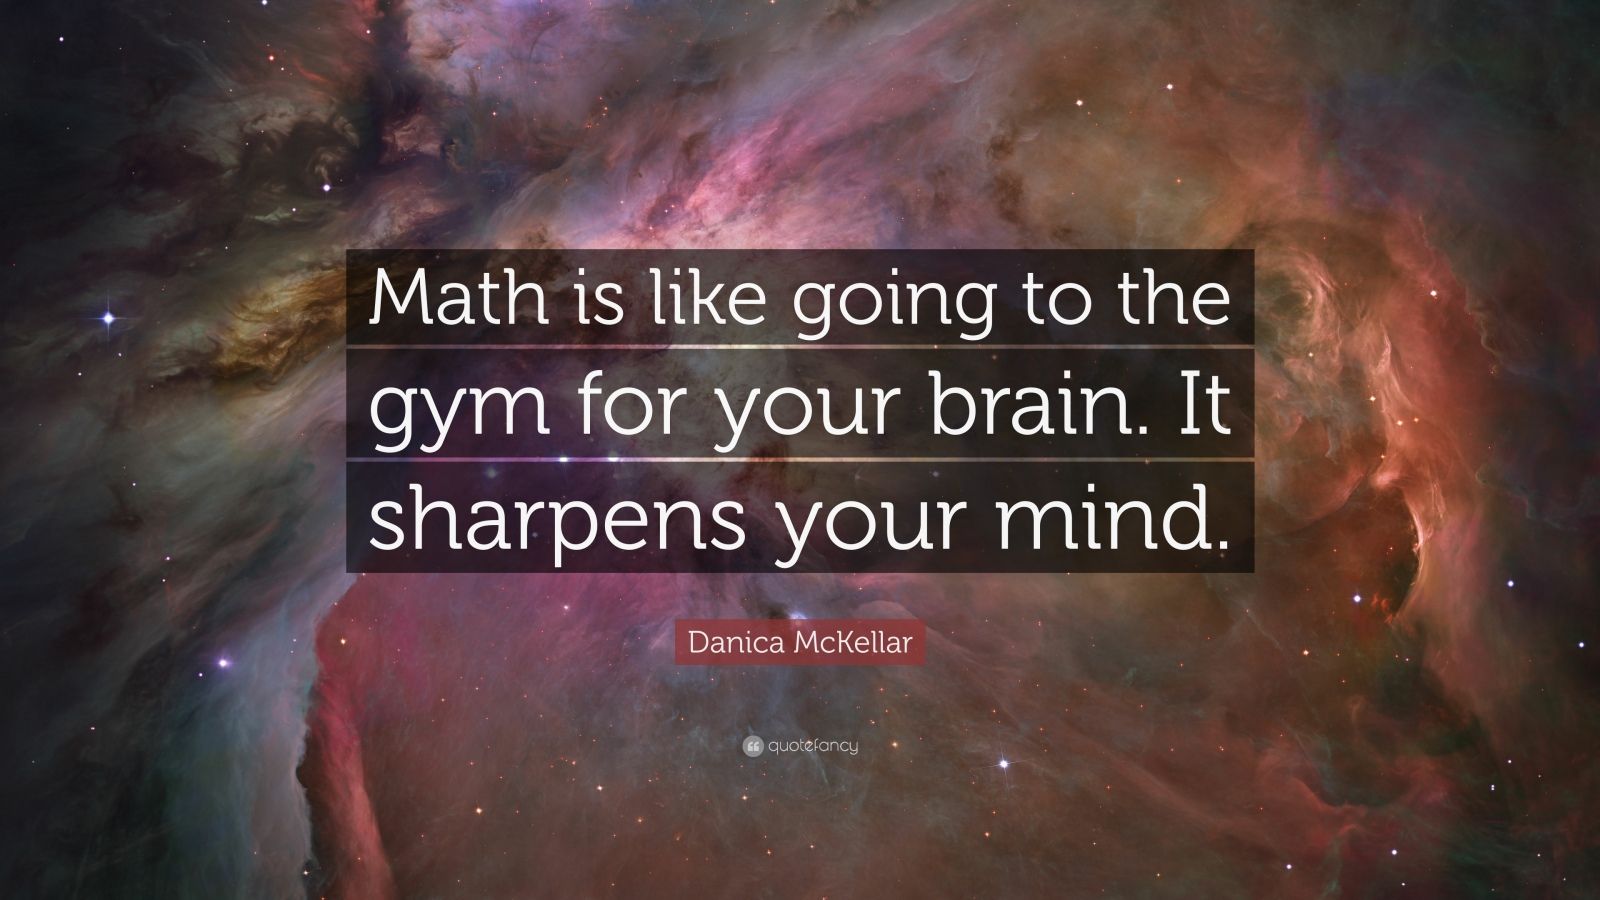 Danica McKellar Quote: “Math is like going to the gym for your brain